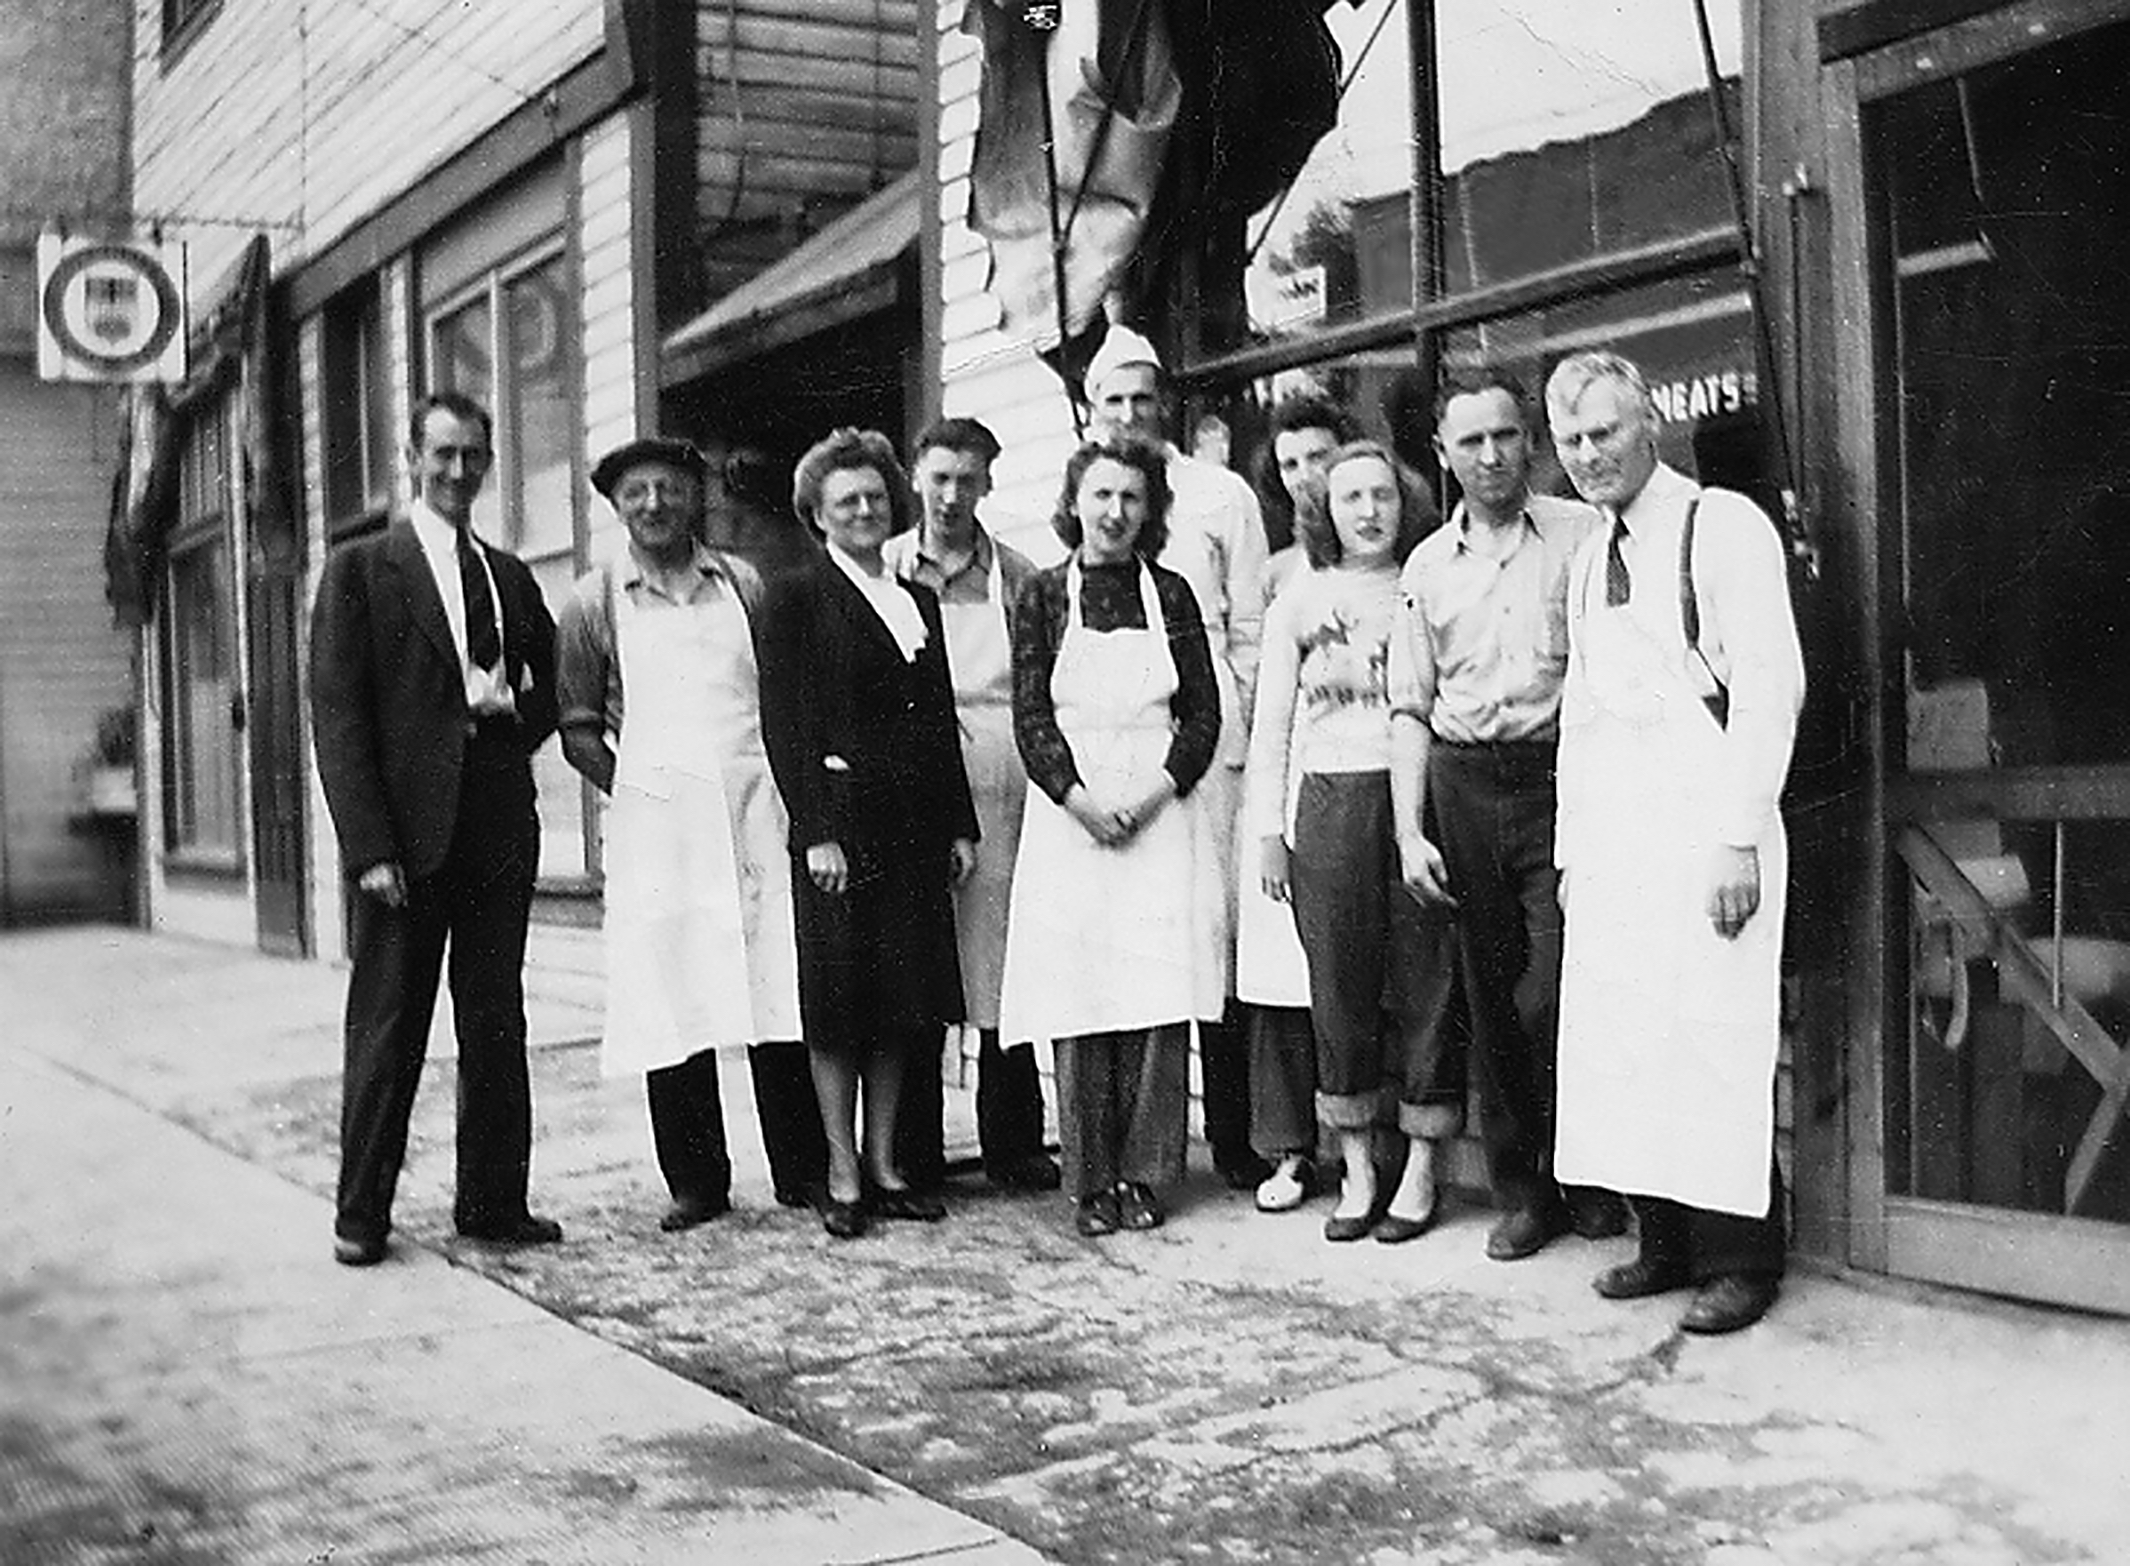  Dick Askew, 2nd from left with employees and family members: Mac Drage, Gwen Drage, Don, Marjorie, David, Marion and Doreen Askew, Mike Bodner and Fred Lee in front of the alexander location in the late 40’s. 